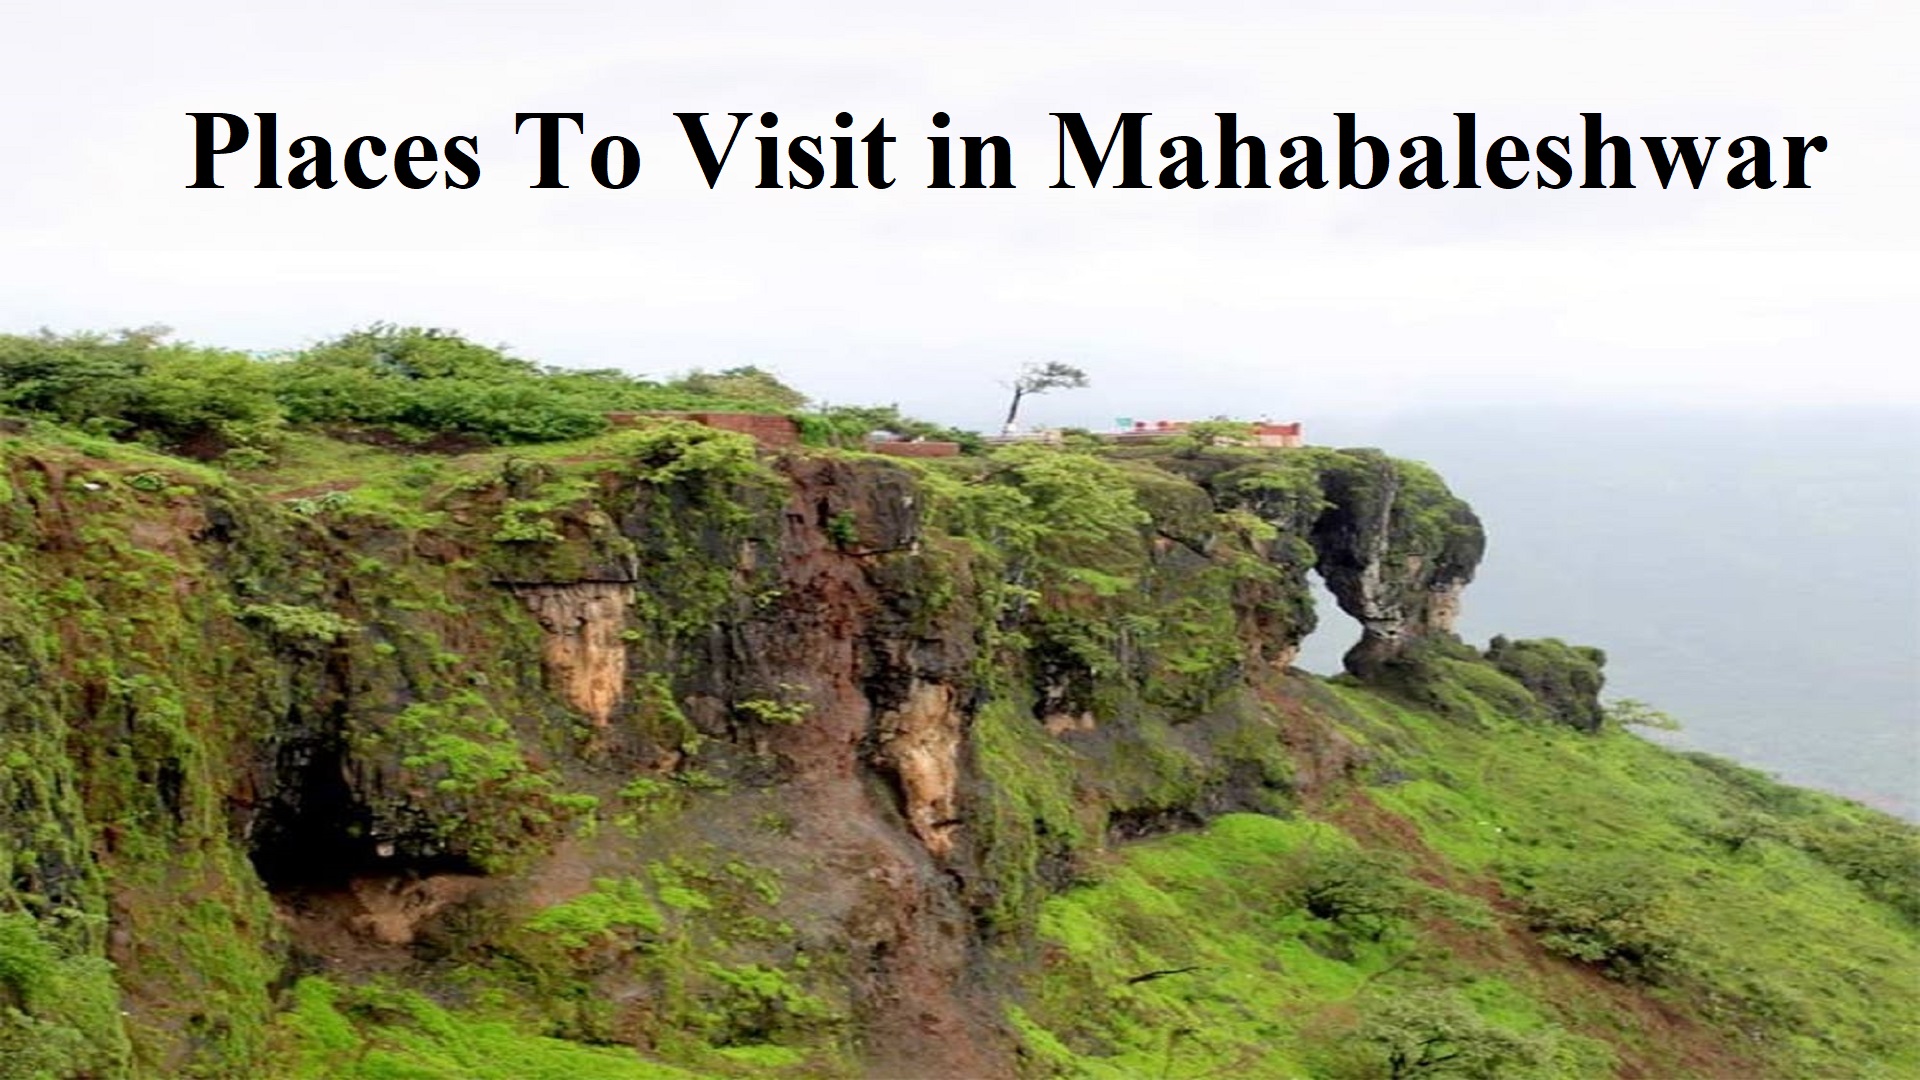 10 Best Places to Visit in Mahabaleshwar